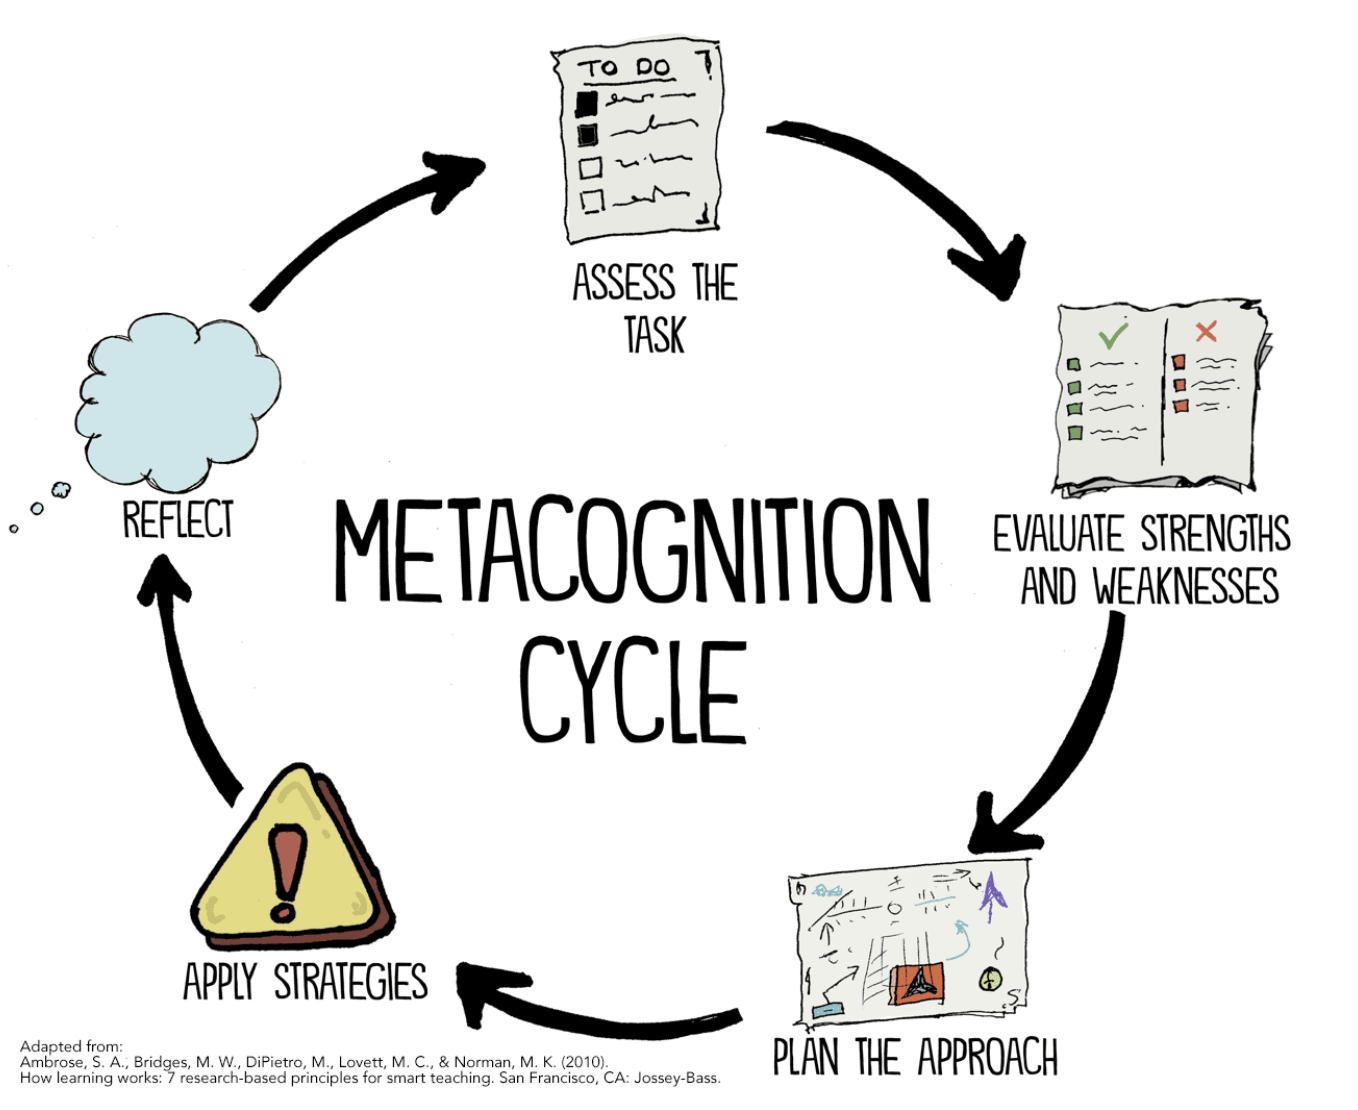 image-metacognition cycle